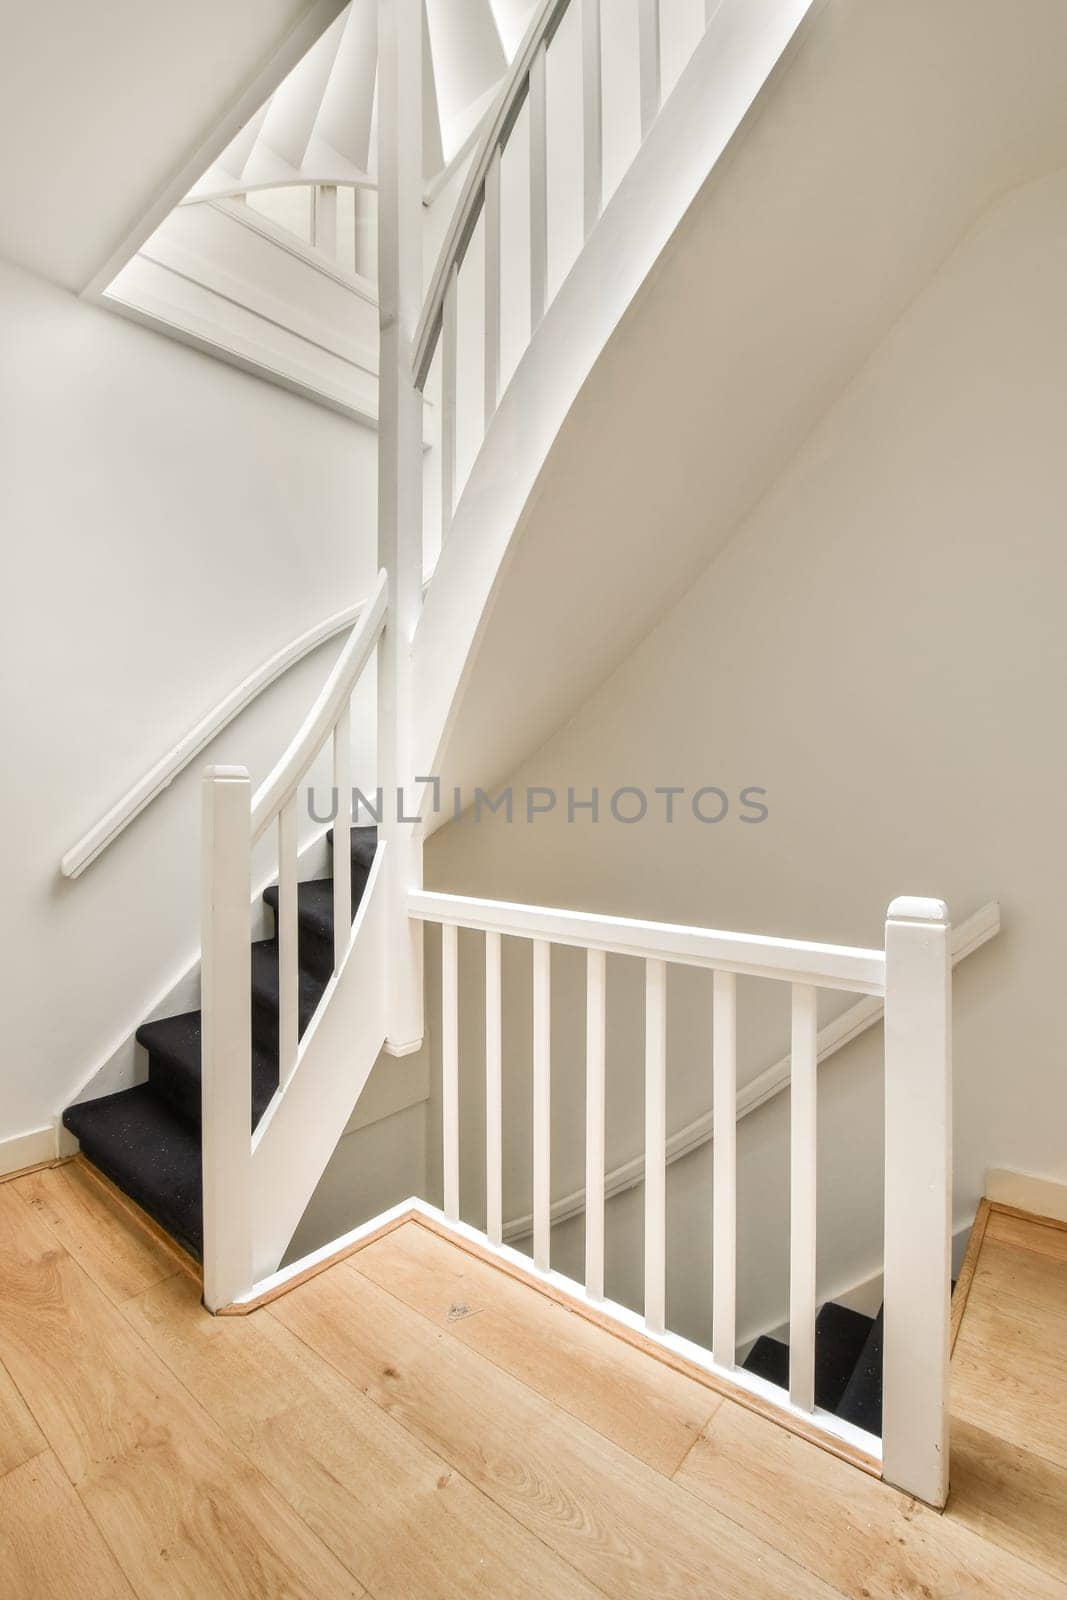 an empty room with stairs and a dog bed on the floor in front of the staircase leading up to the second floor